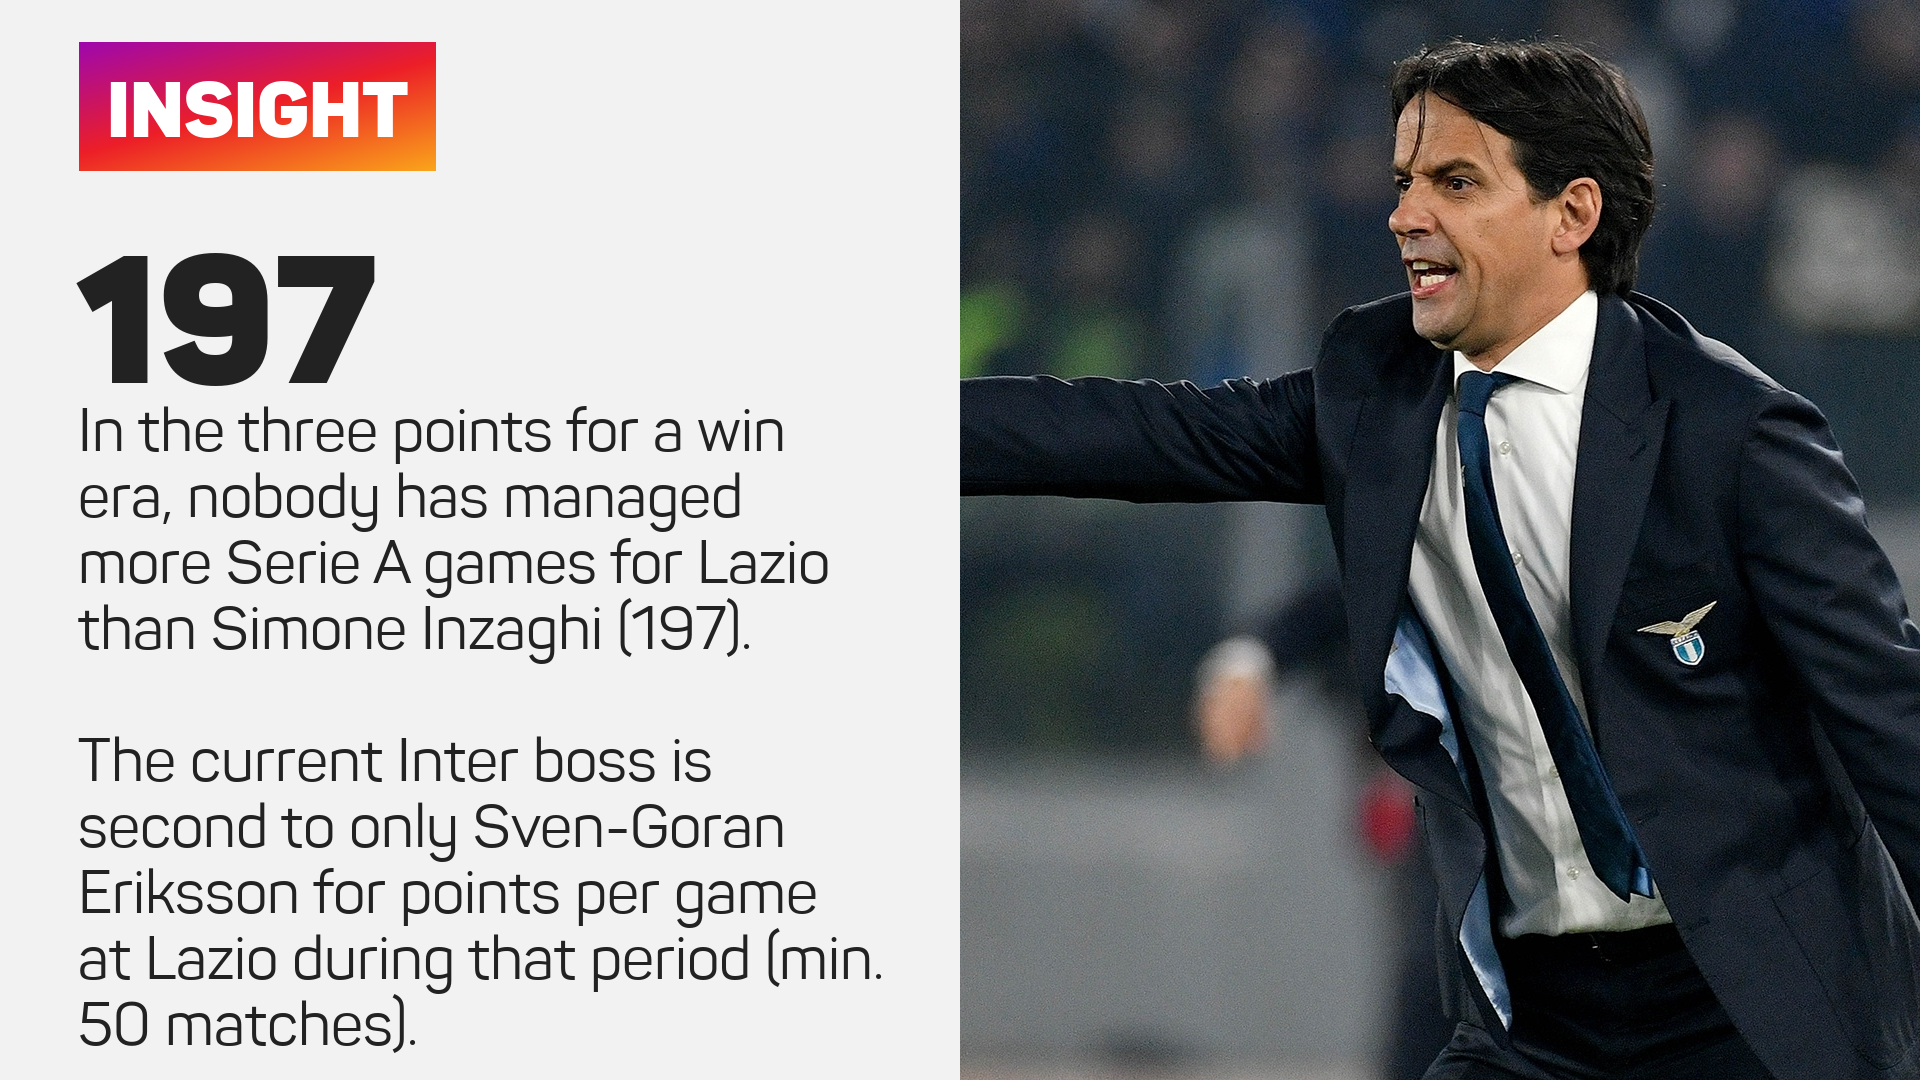 Simone Inzaghi managed 197 Lazio games in Serie A